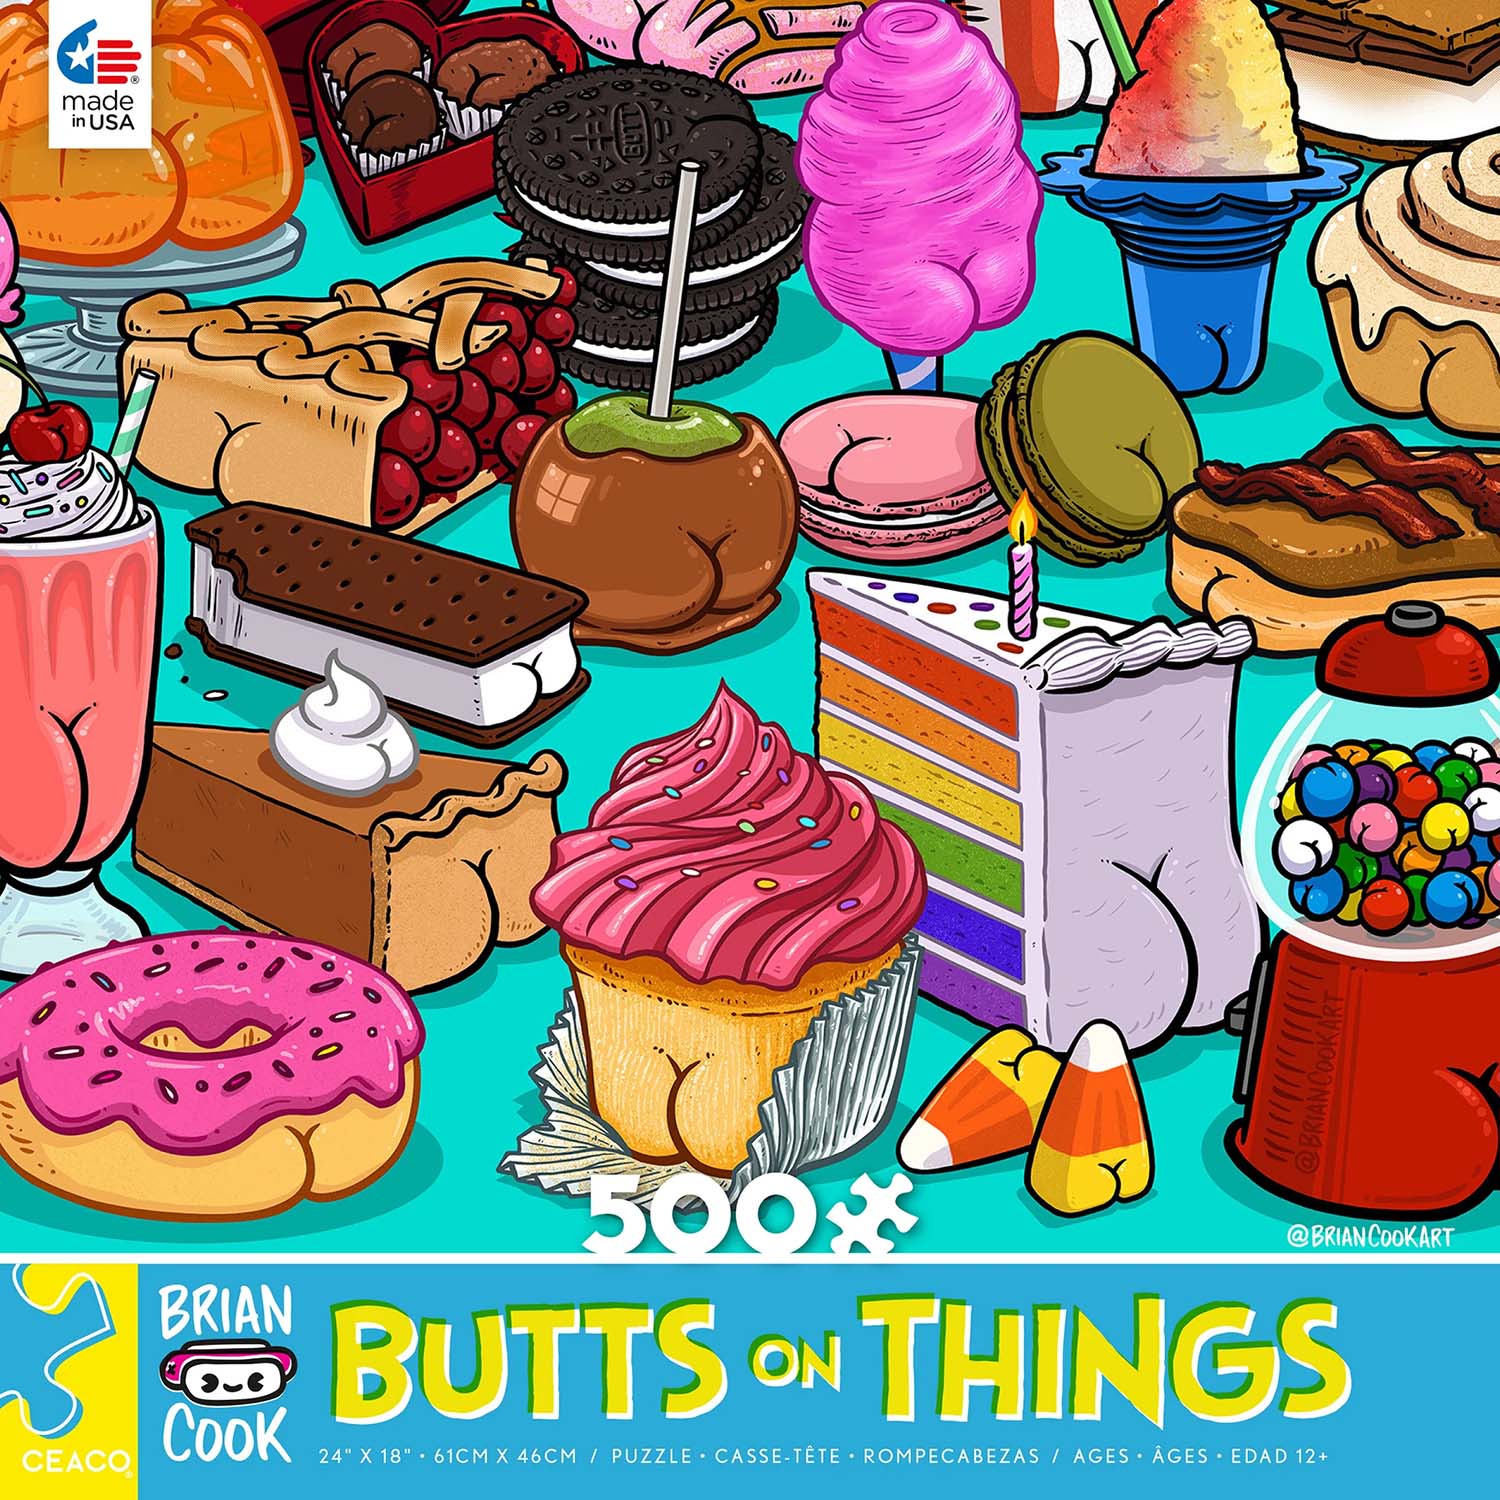 Brian Cook Butts on Things - Sweet Cheeks